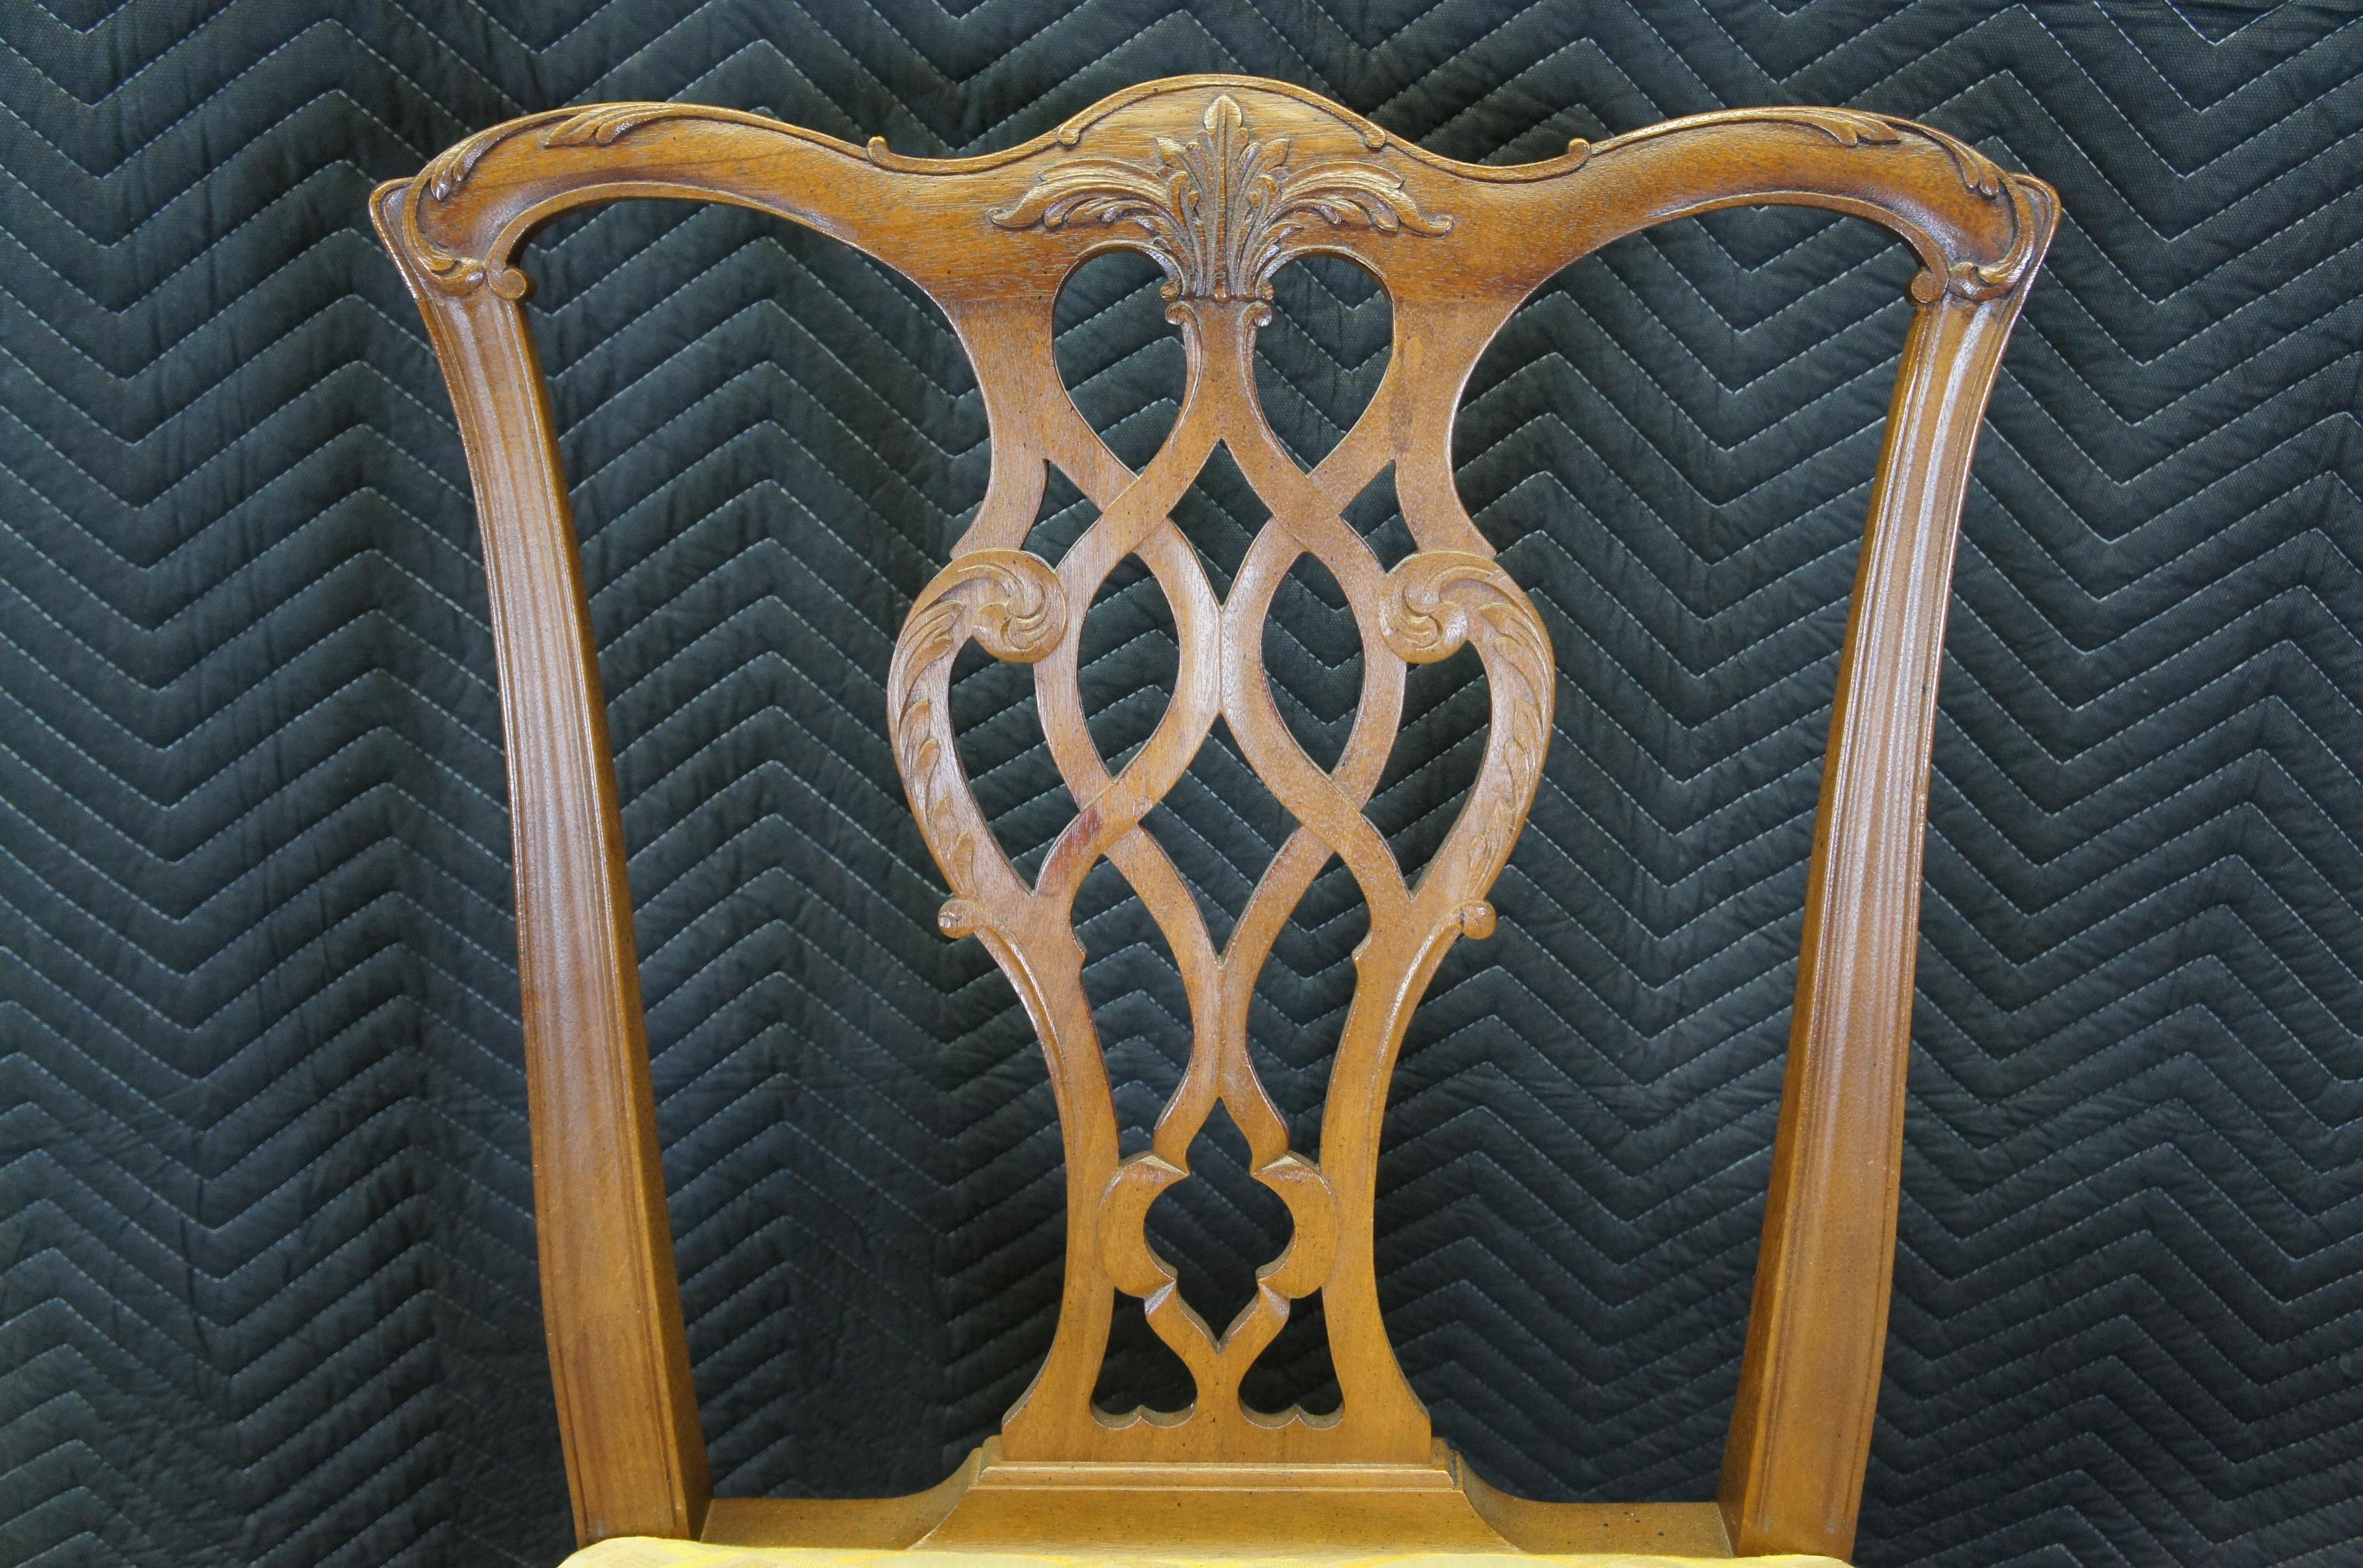 20th Century 6 Baker Furniture Mahogany Chippendale Georgian Style Pretzel Back Dining Chairs